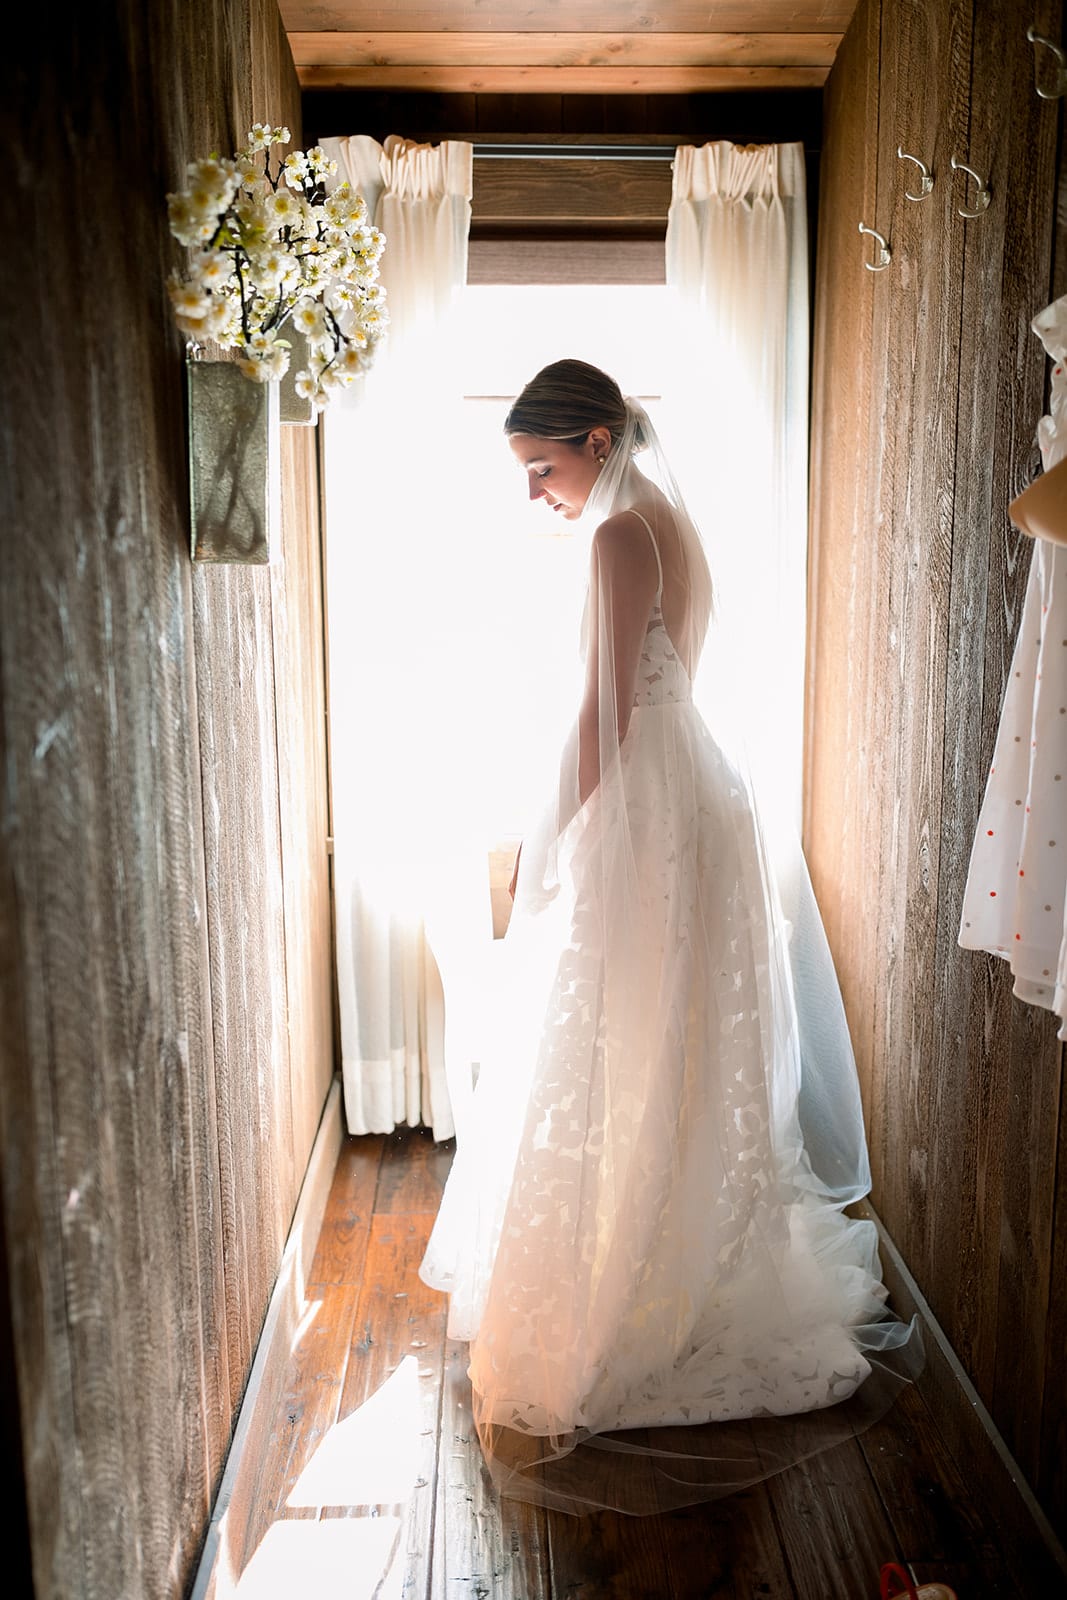 Joon Bridal // by appointment only - Fayetteville, AR, US, bridal boutique